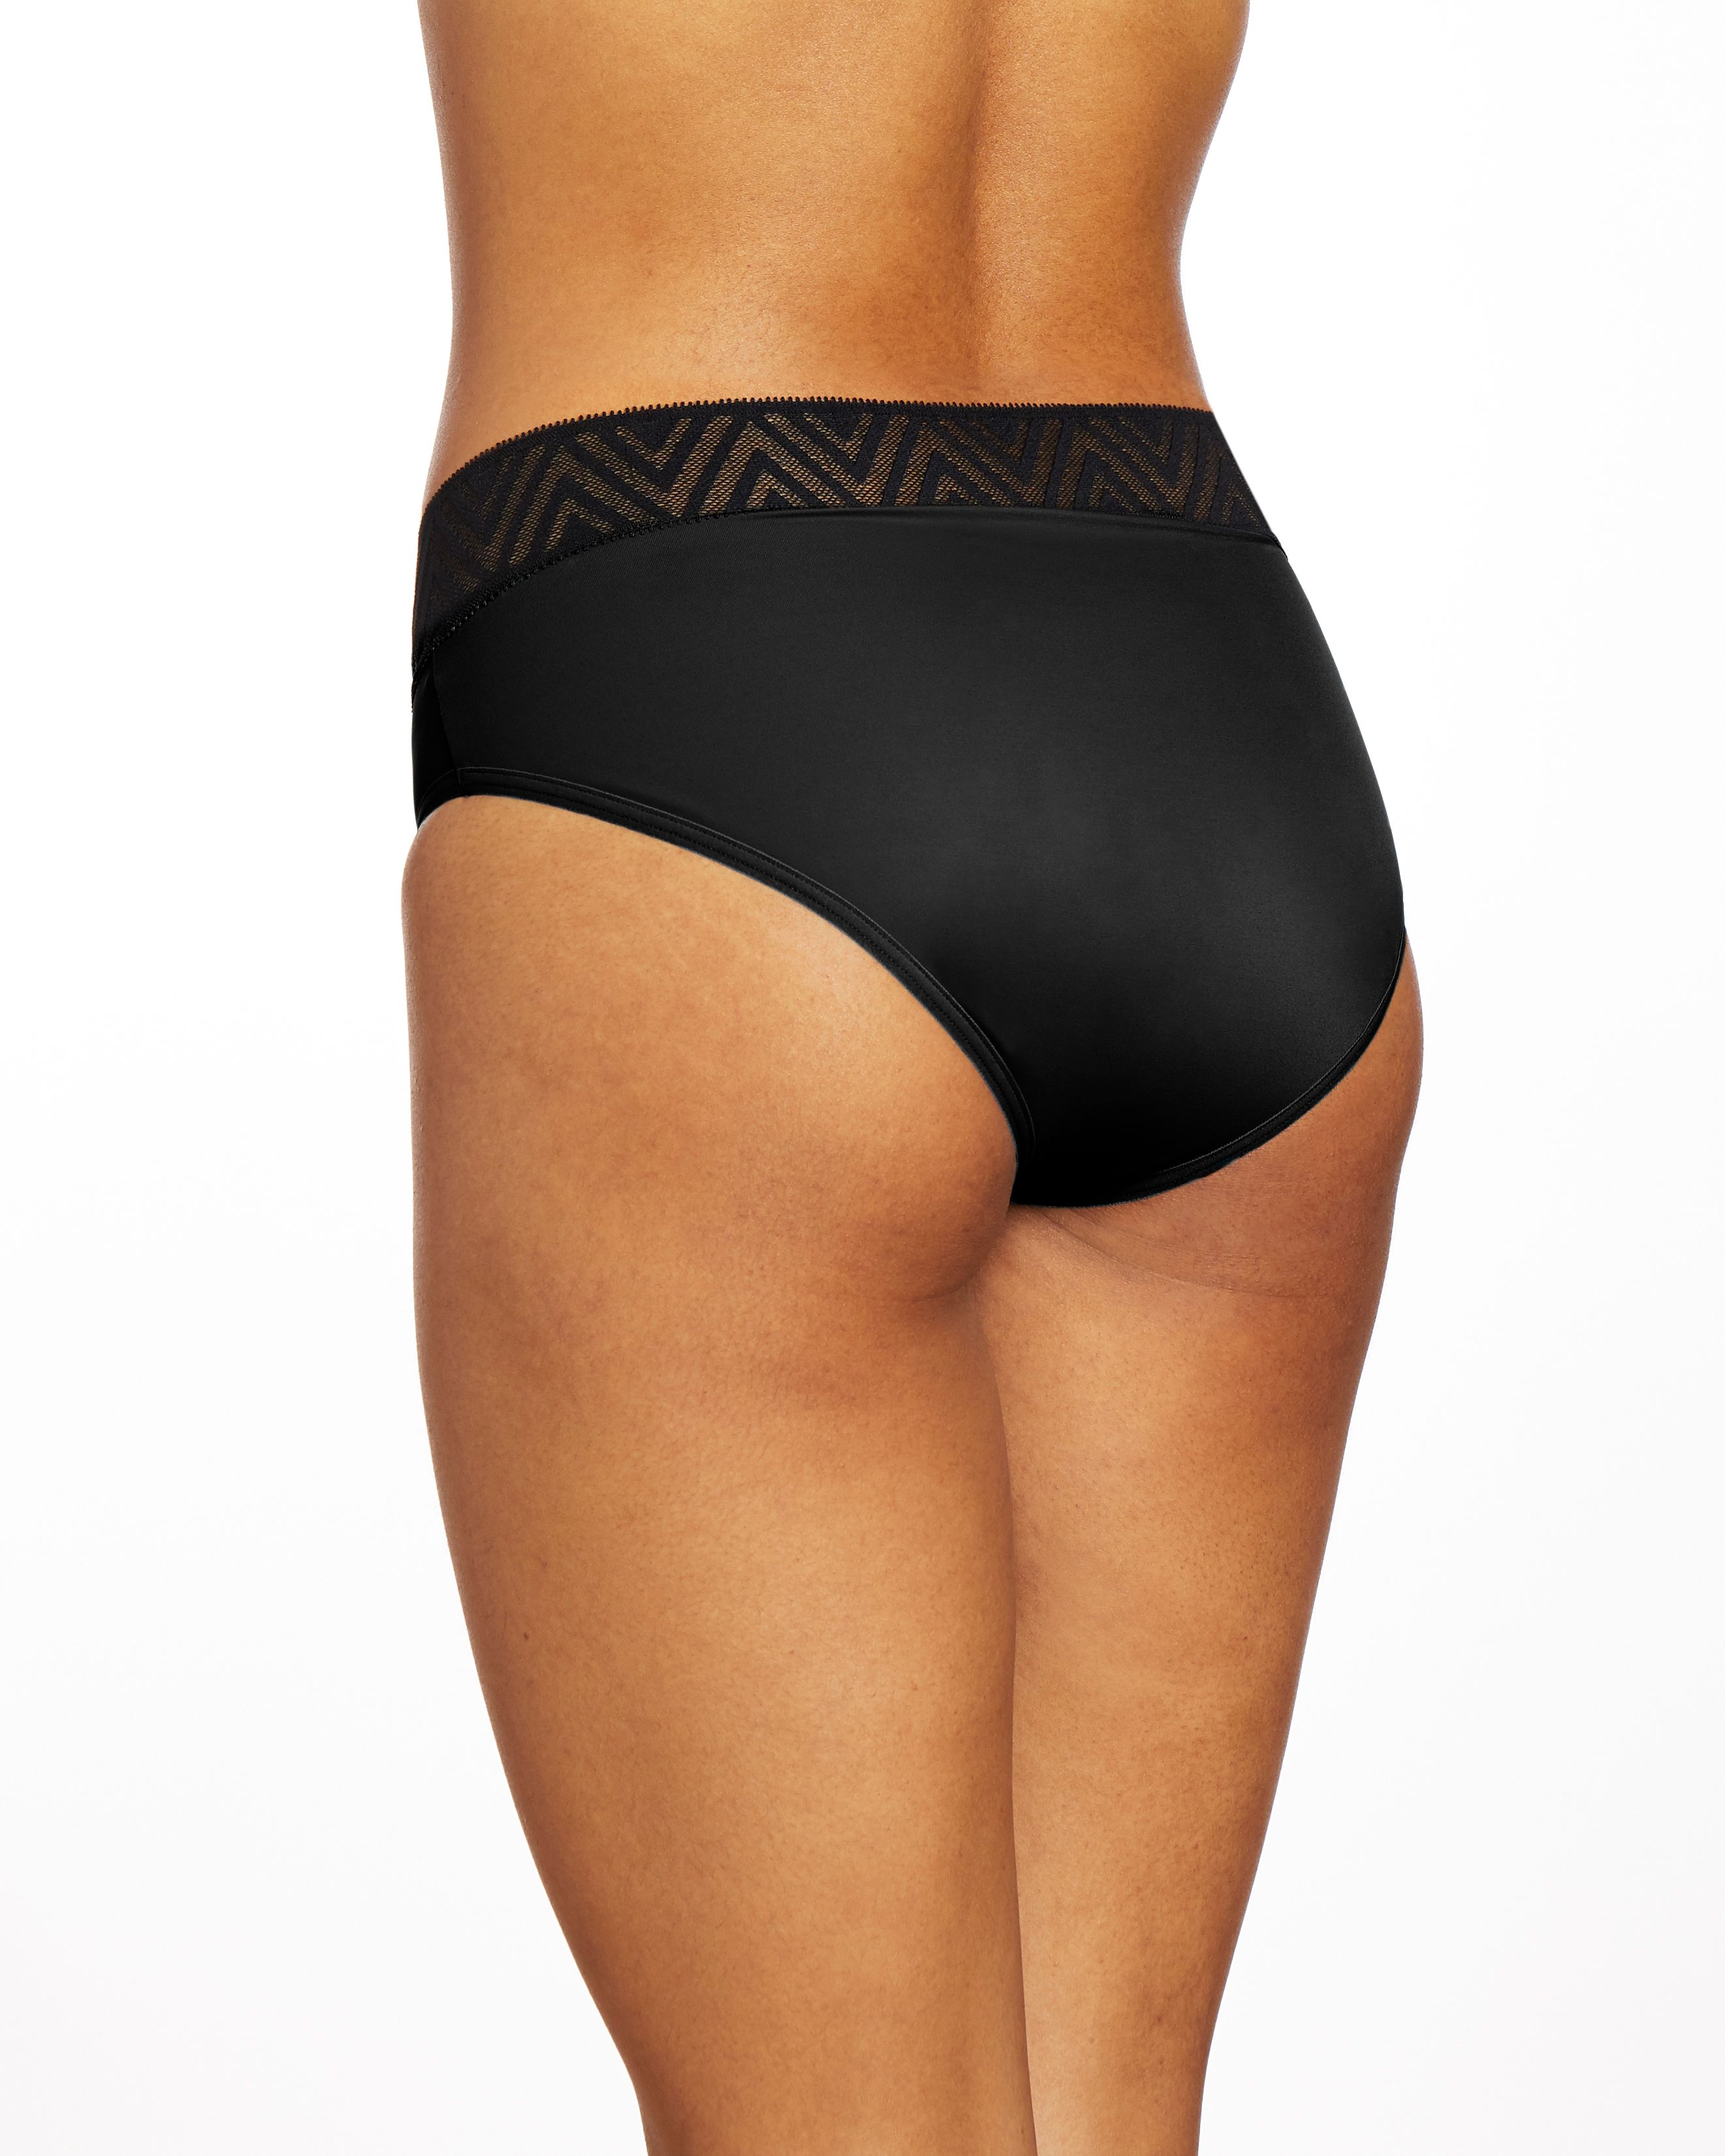 DISCThinx Period Proof Hiphugger Black - M (New Geo Lace)